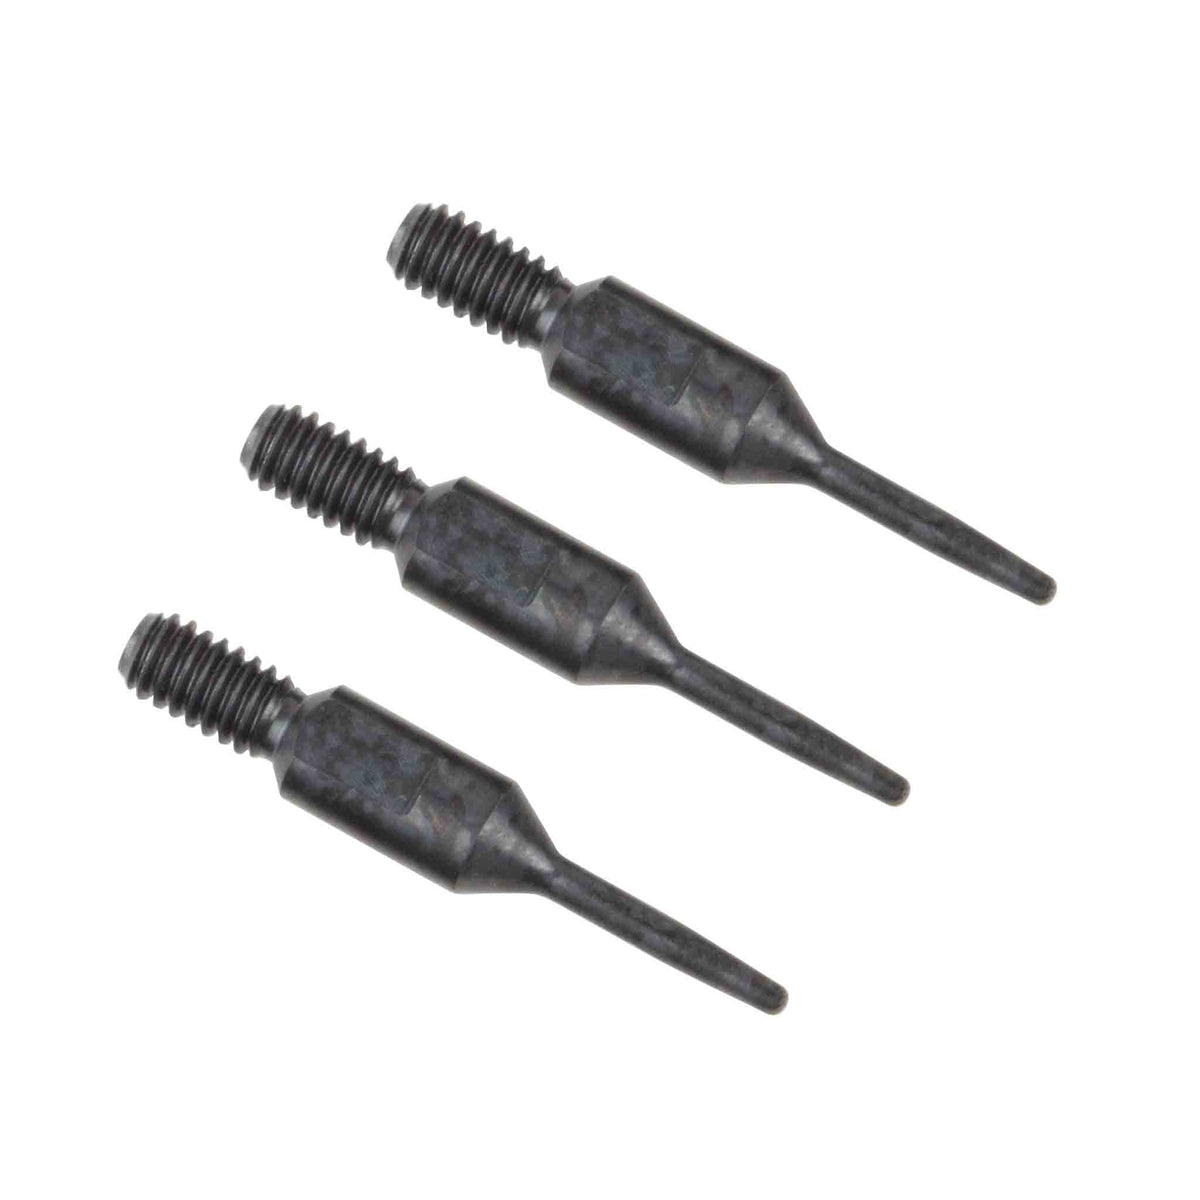 Super Duty Decapping Pins